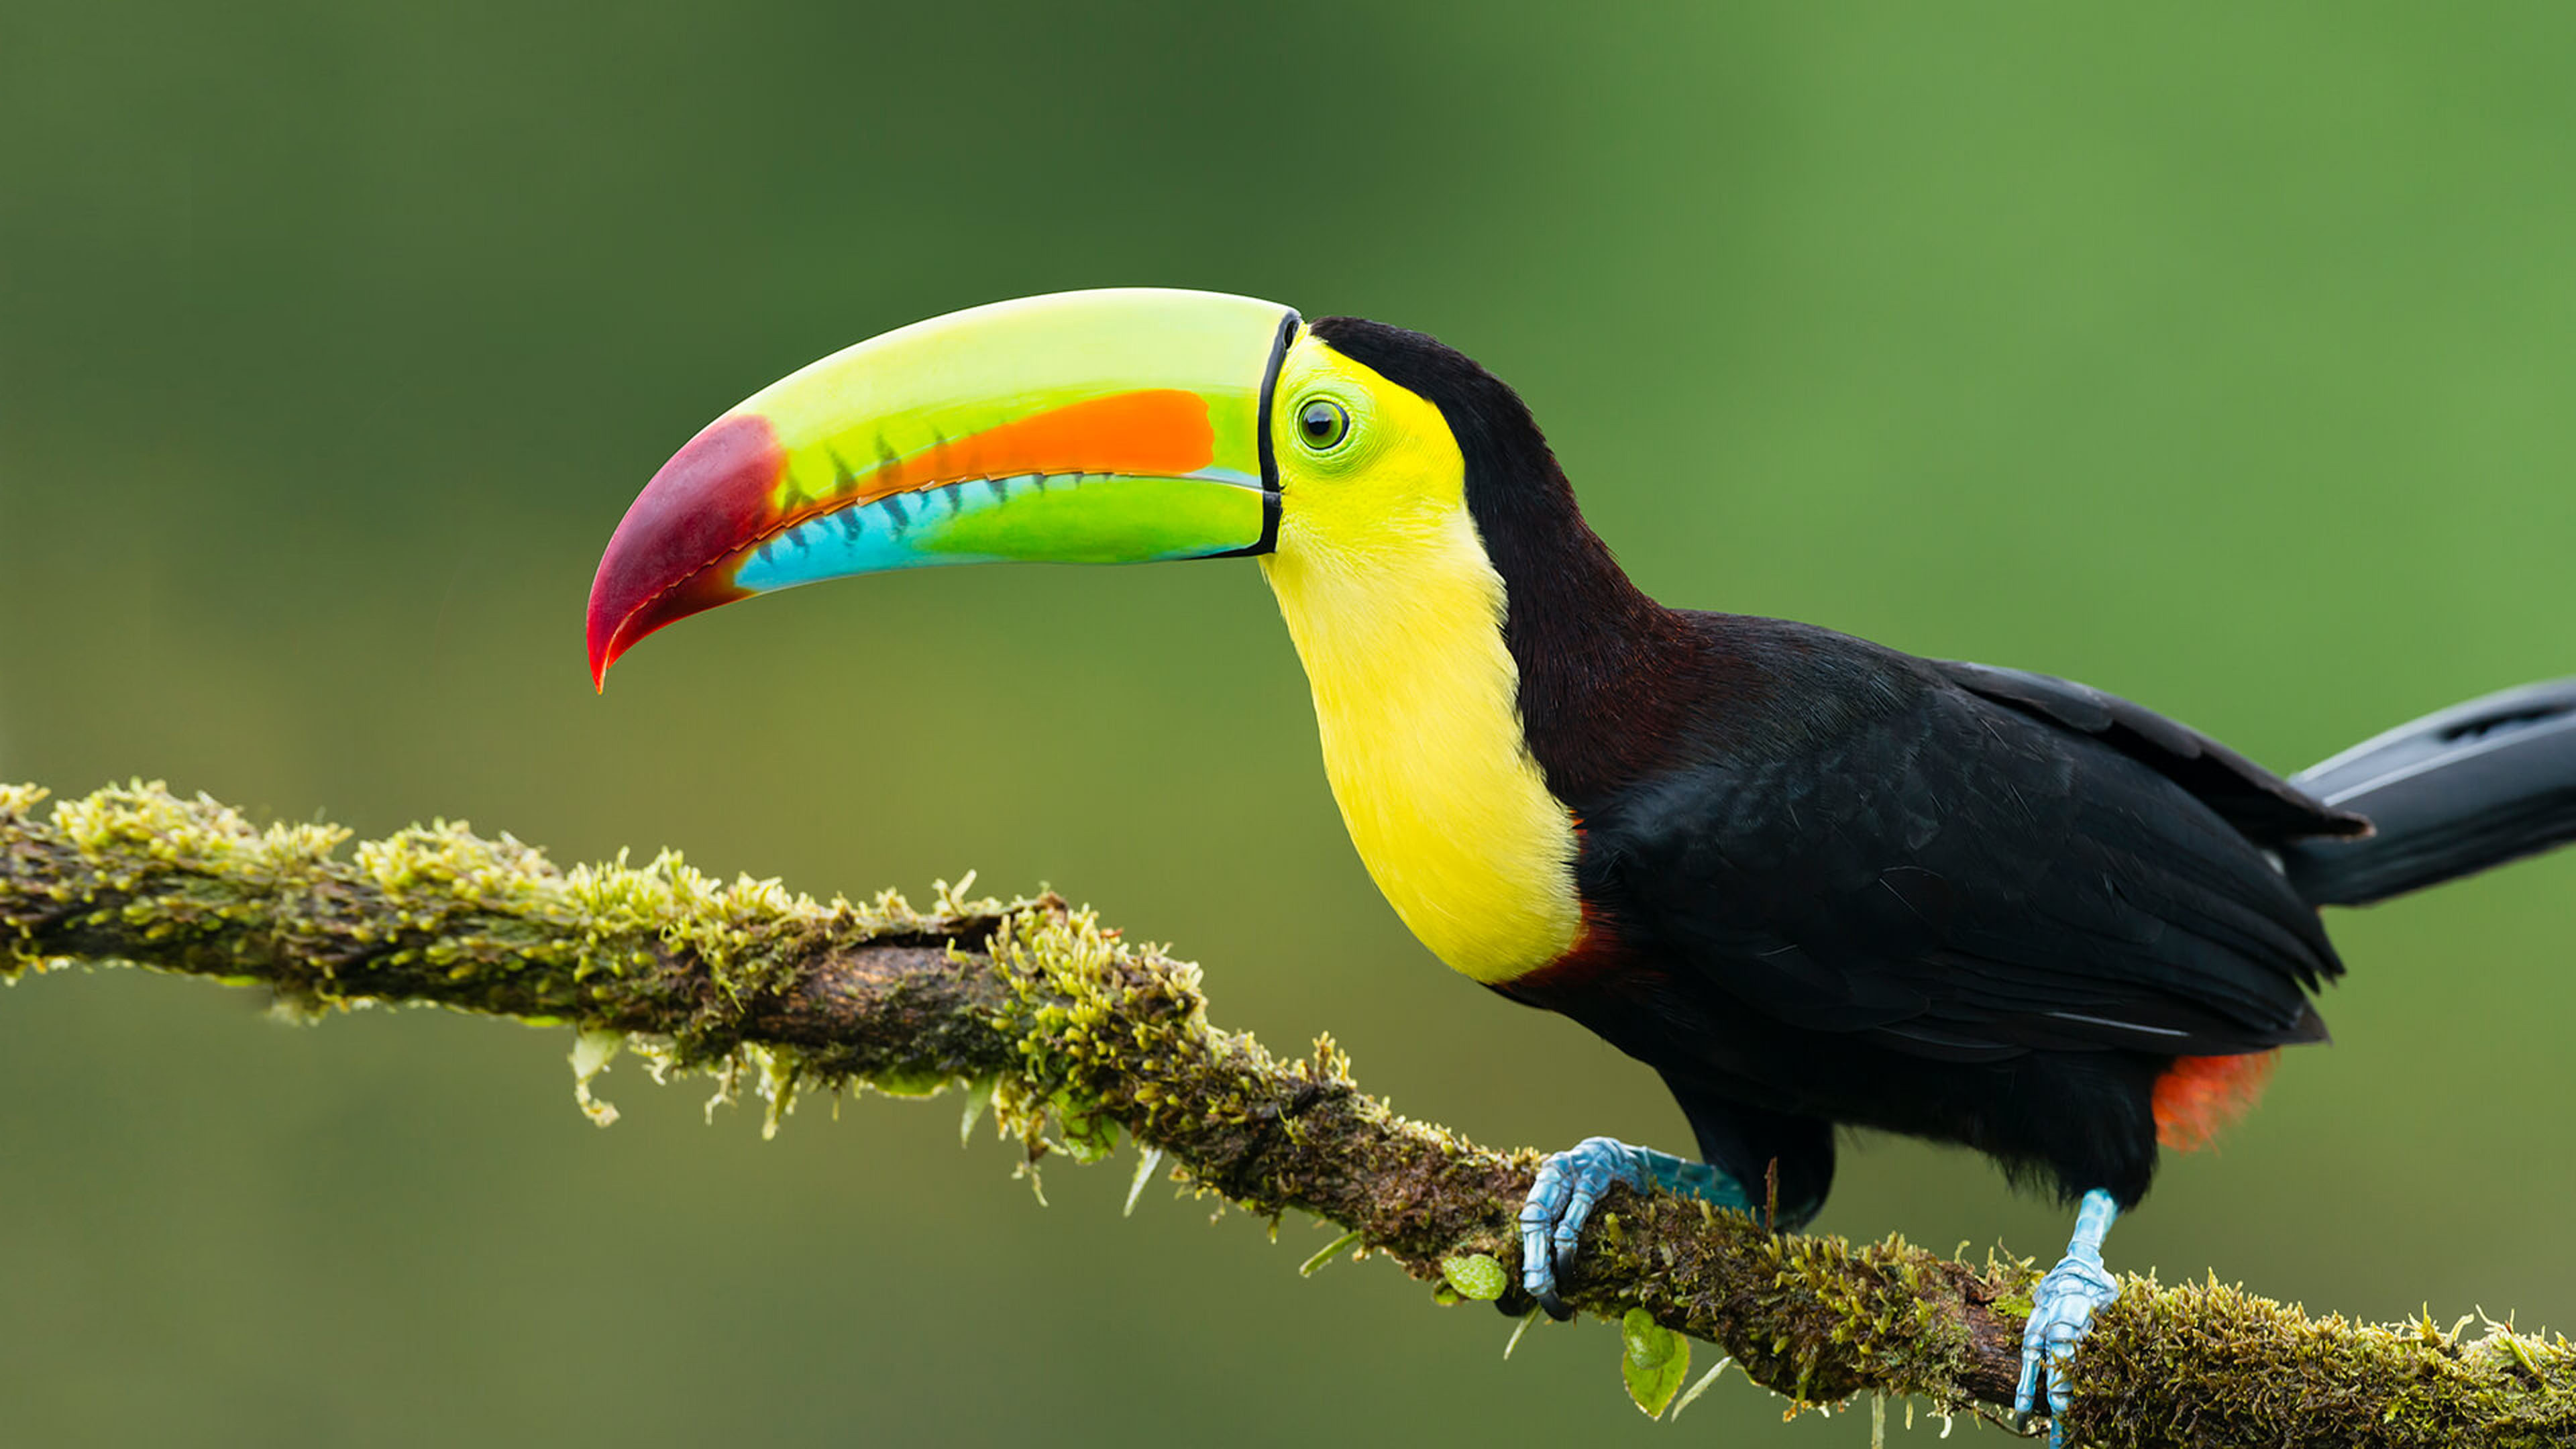 Animals Exotic Birds Toucan Colorful Birds On A Branch Photography 4k  Wallpaper Download For Desktop Mobile Phones And Laptops : 